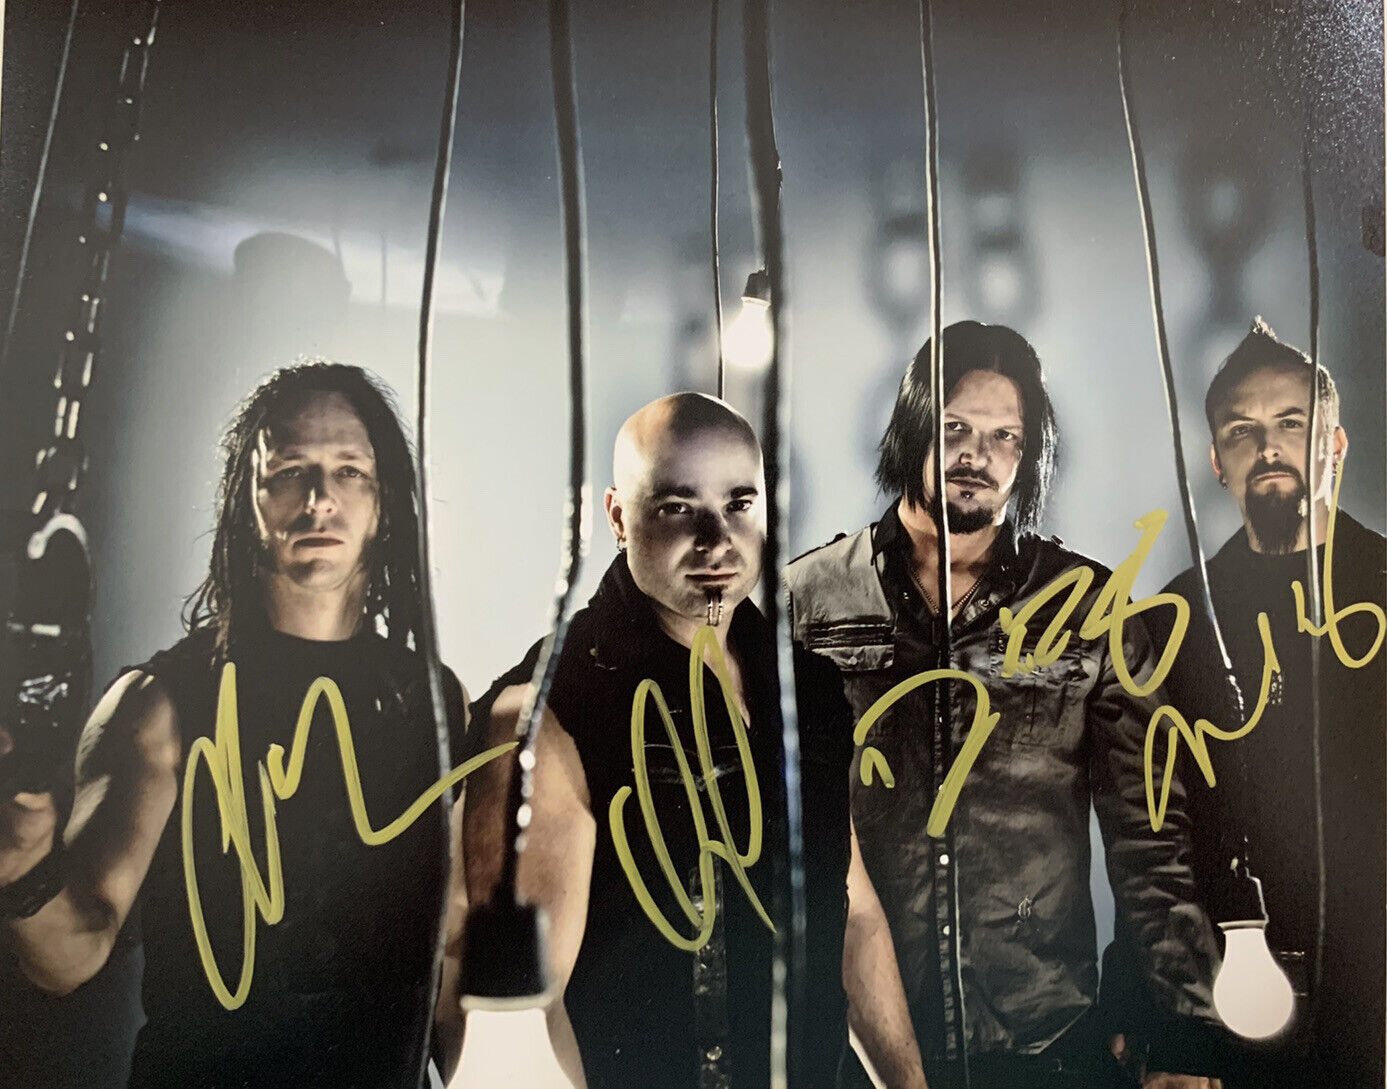 DISTURBED FULL BAND HAND SIGNED 8x10 Photo Poster painting AUTOGRAPHED RARE AUTHENTIC